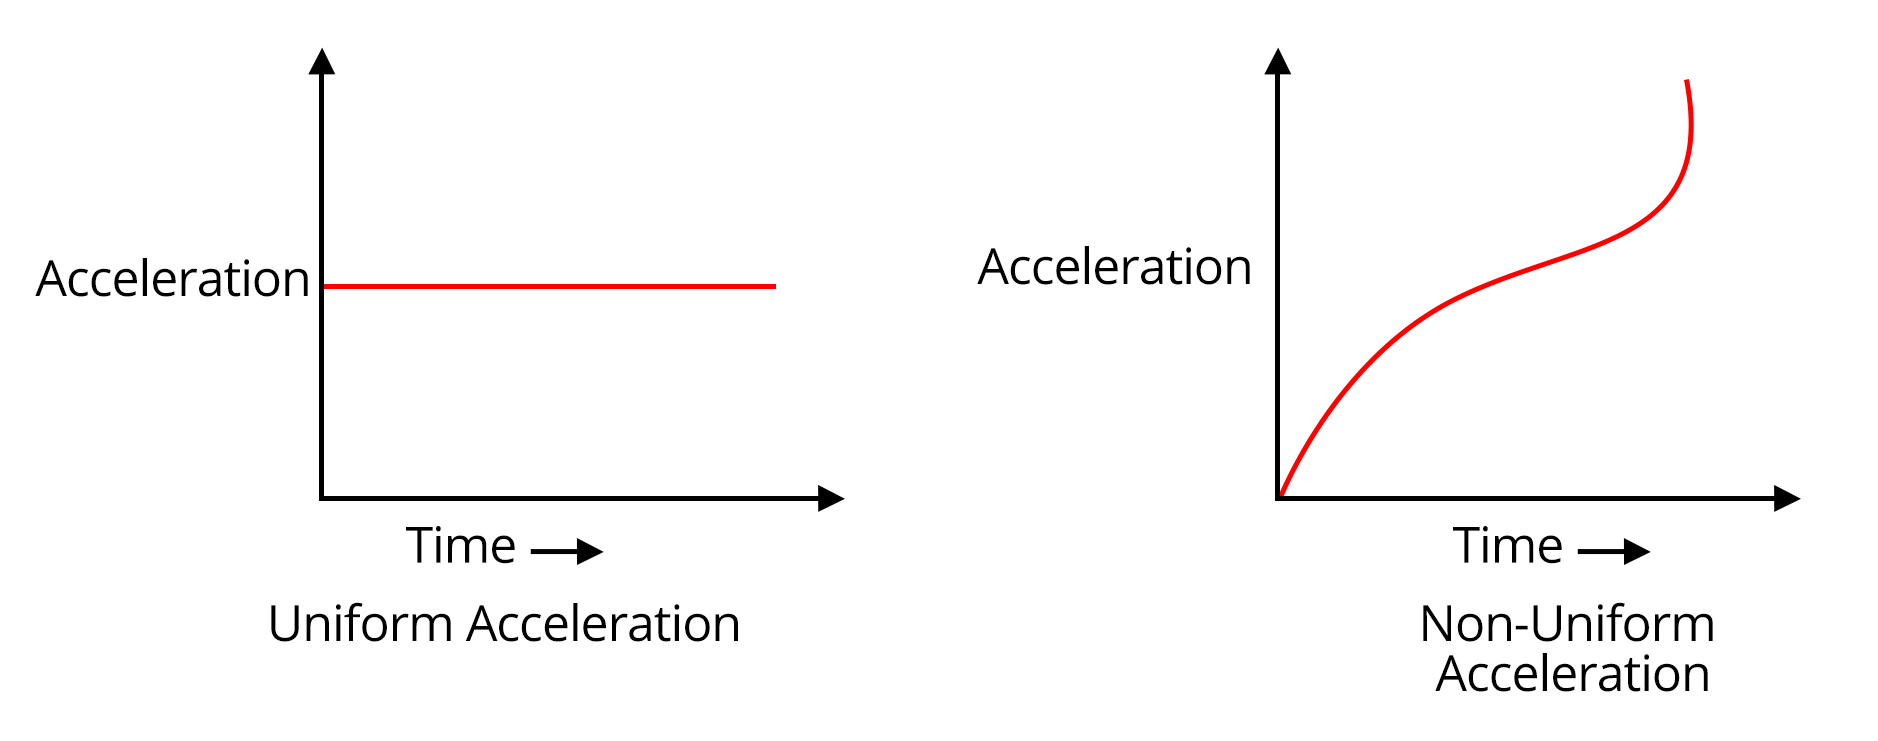 Acceleration - time graph